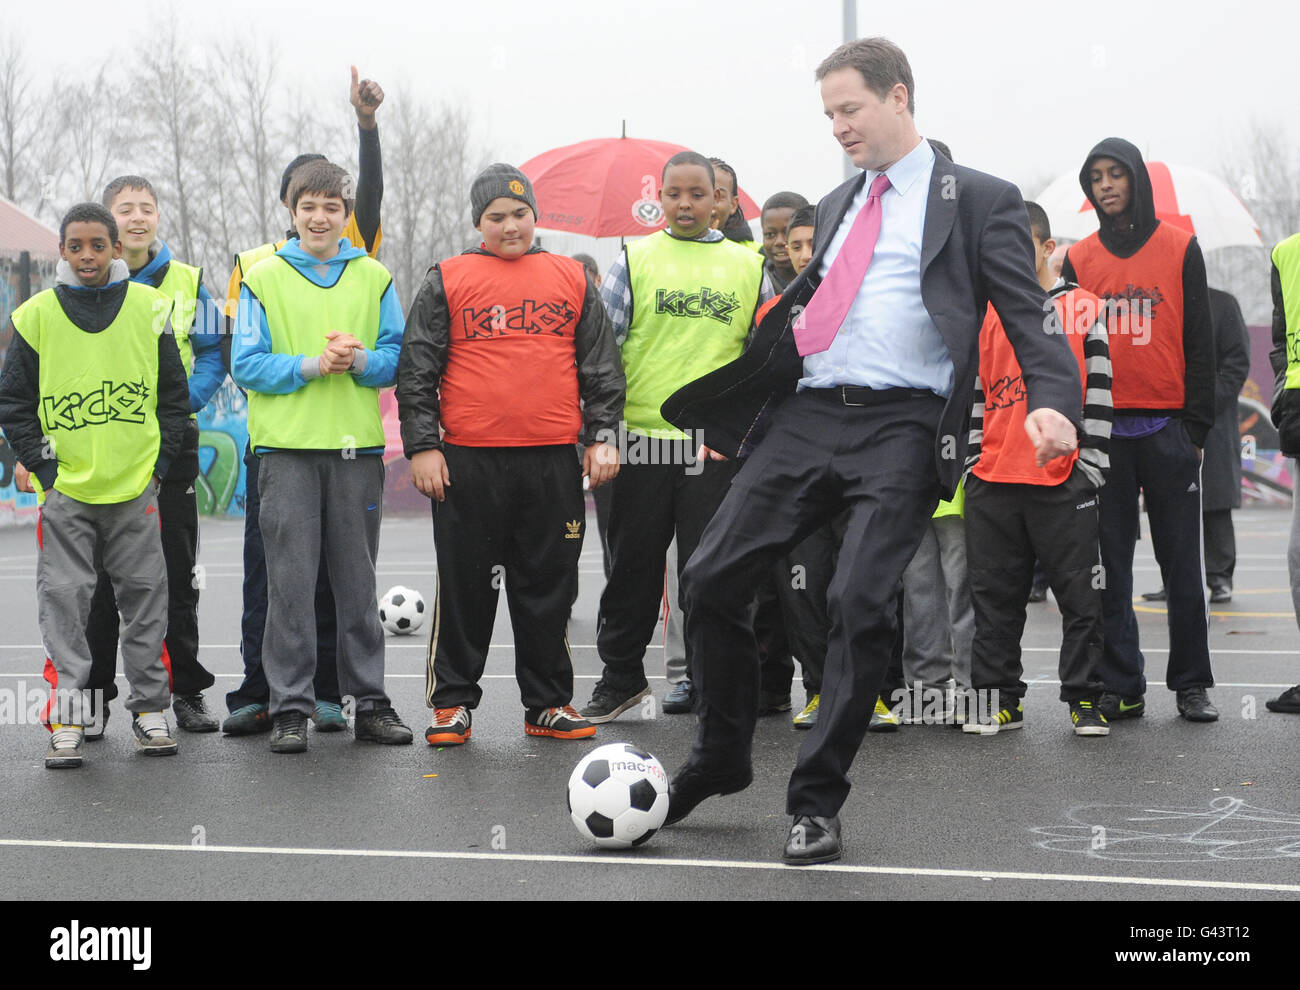 Deputy Prime Minster Nick Clegg takes a penalty kick during a training session at inner city football project, Kickz, run by Sheffield United FC, in Mount Pleasant, Sheffield. Stock Photo